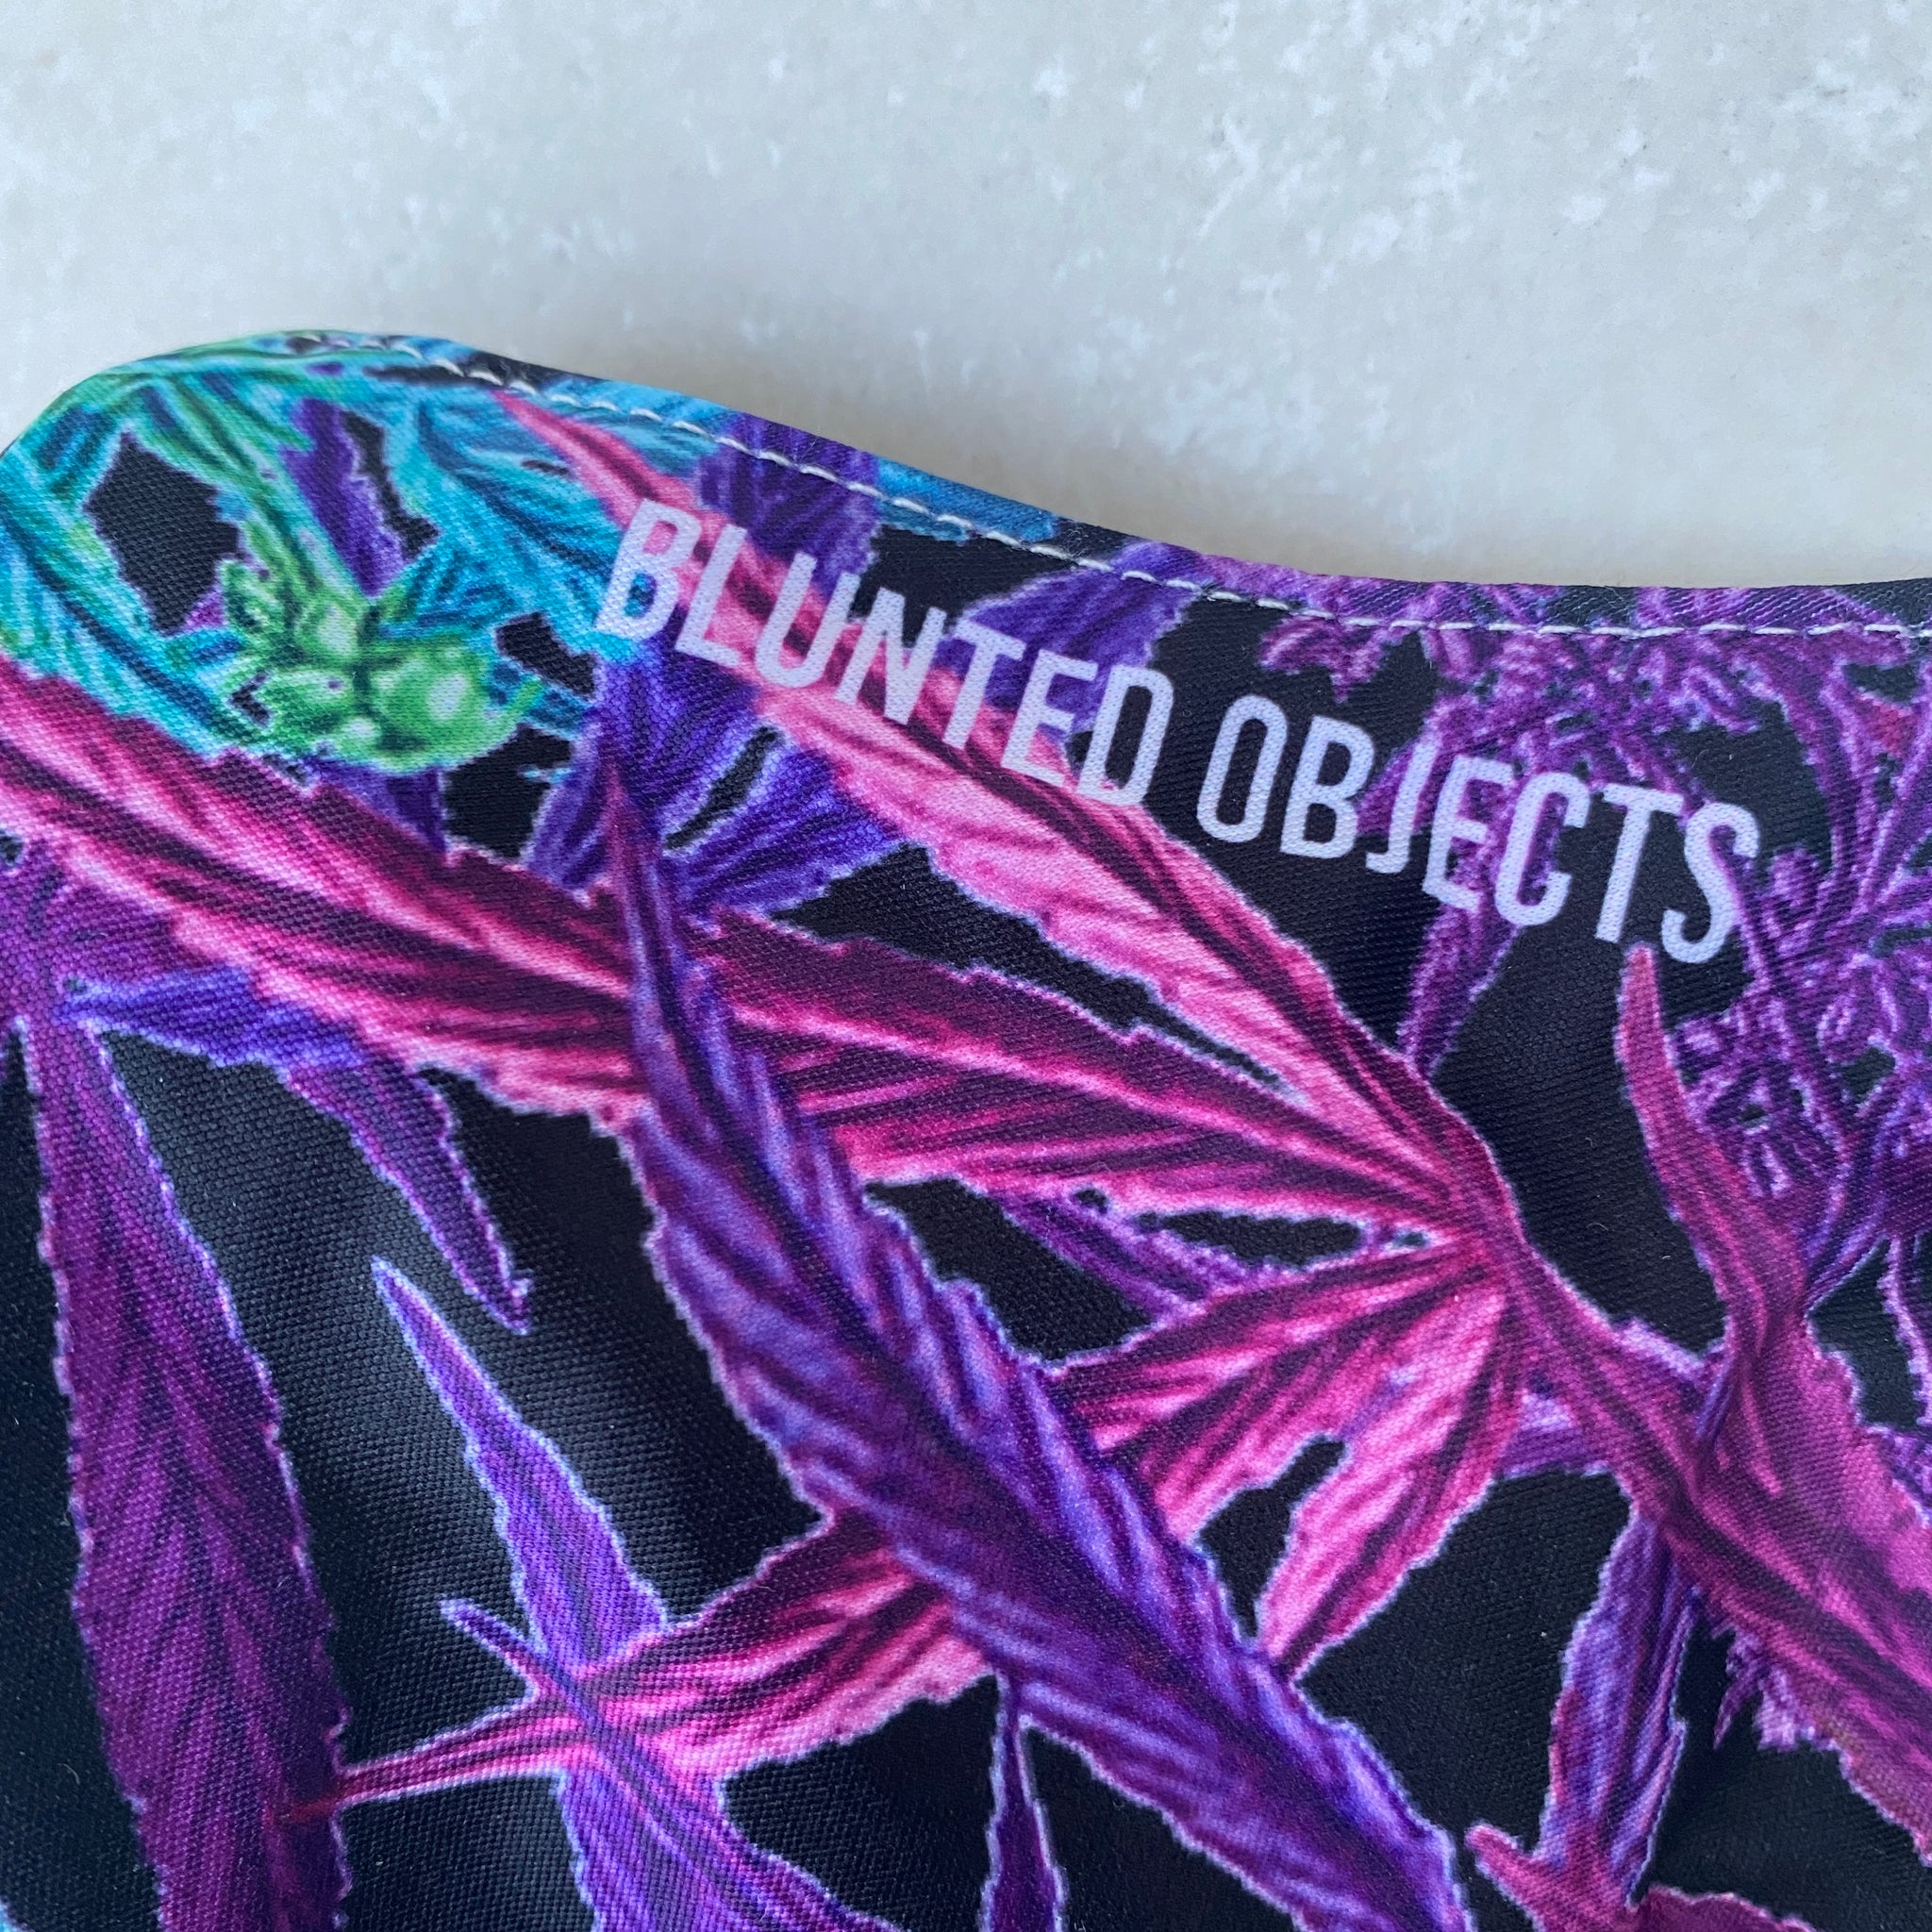 Blunted Objects Weed Print Face Mask - Purple